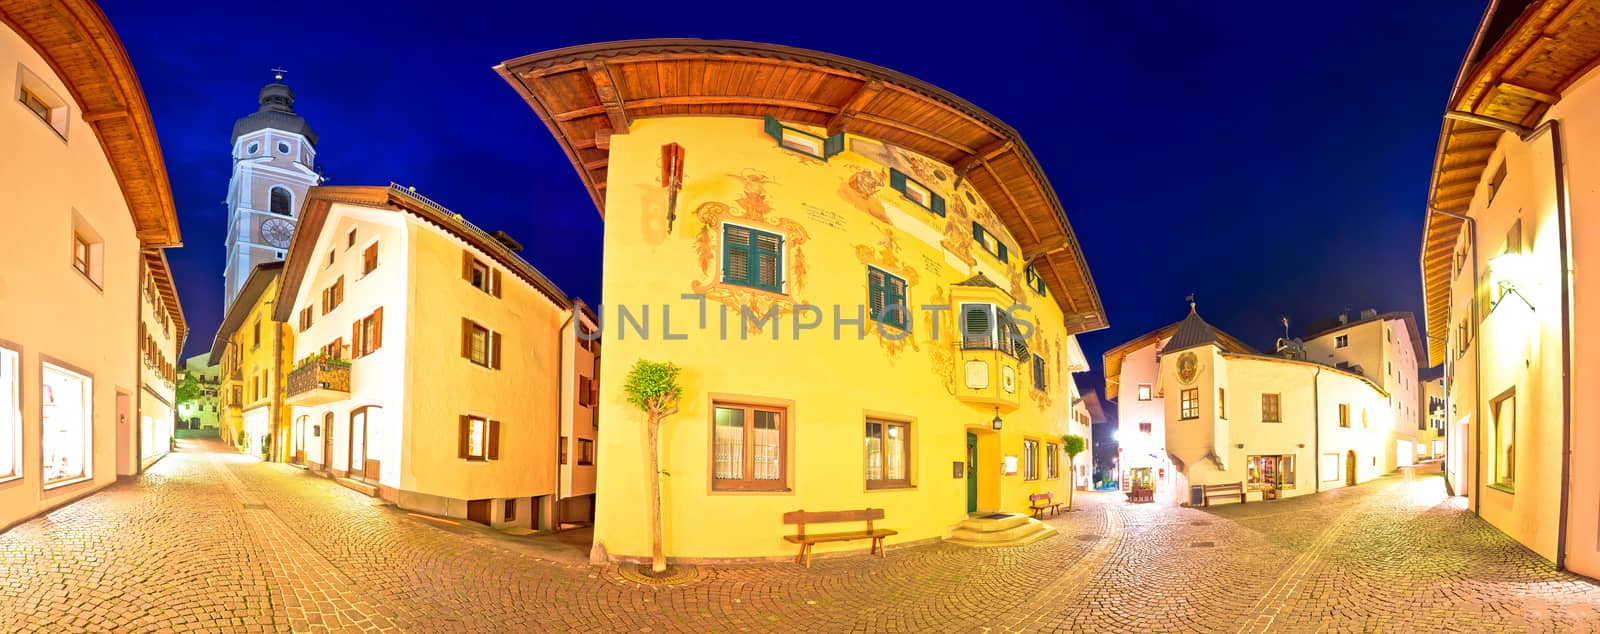 Town of Kastelruth (Castelrotto) street evening panoramic view, Dolomites Alps region of Italy